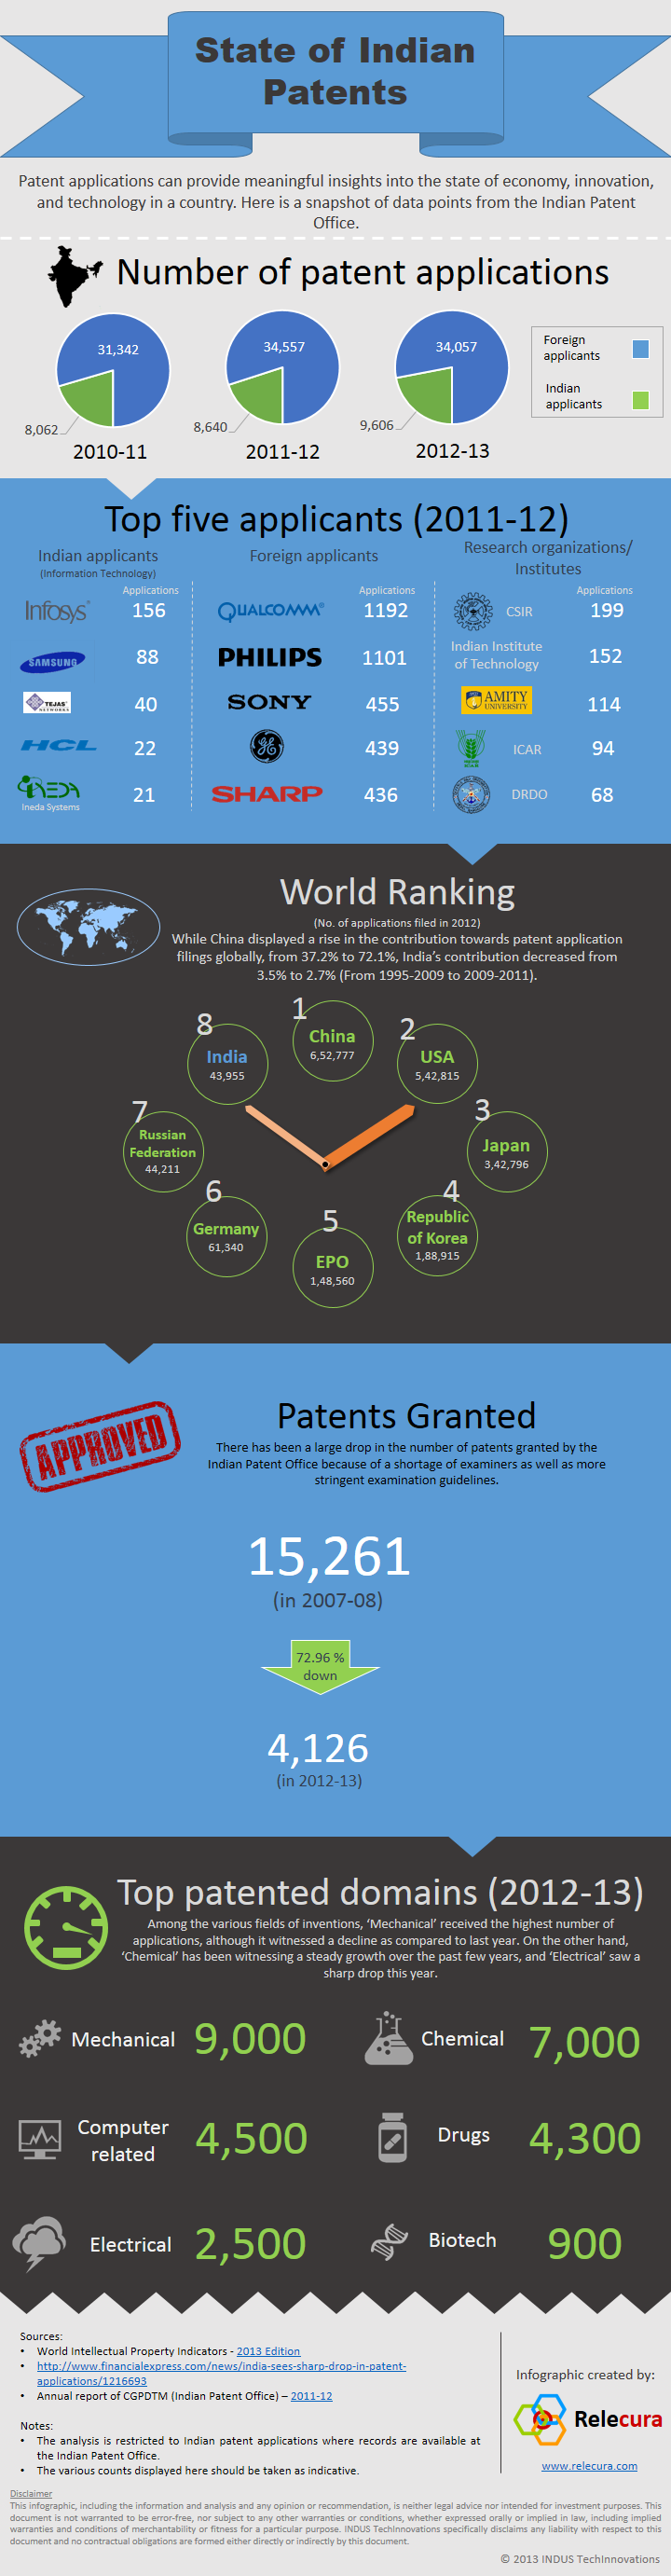 State of Indian Patents